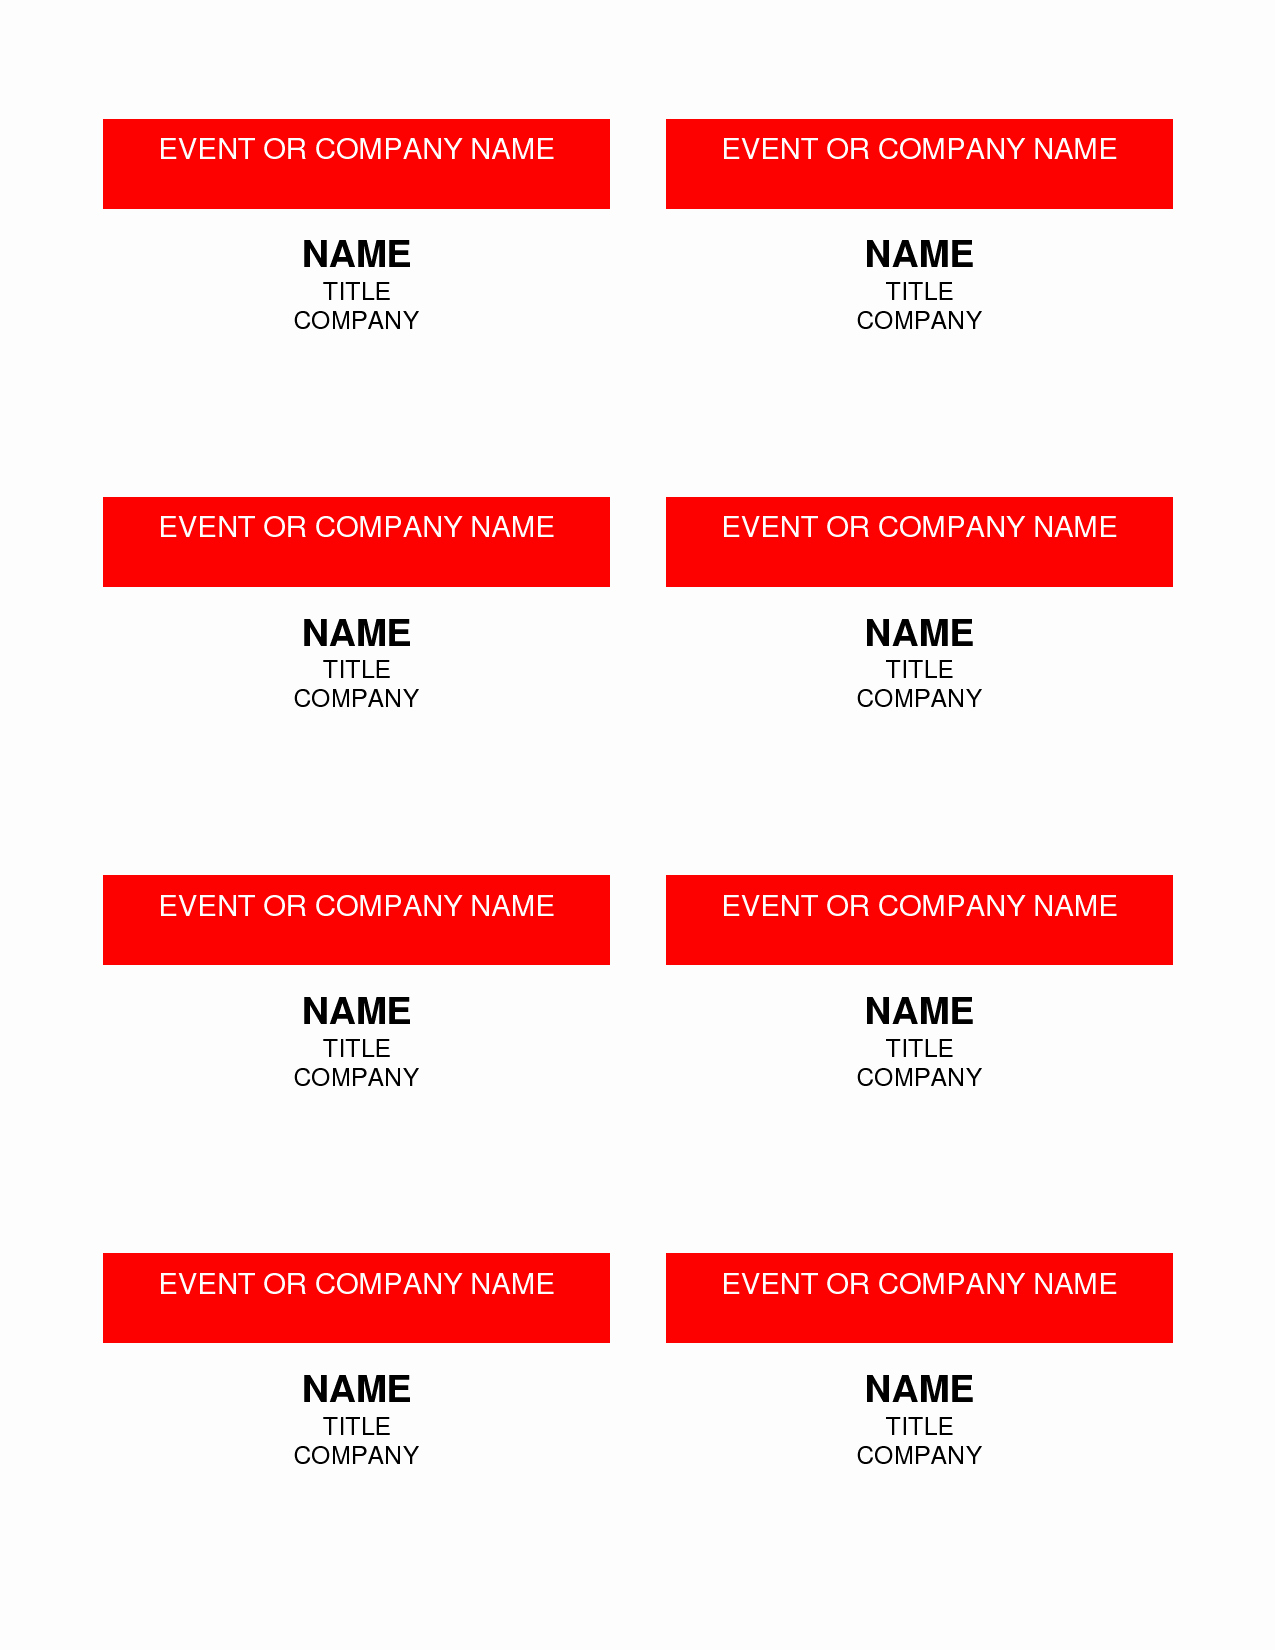 Free Template for Name Tags Luxury Free Other Design File Page 5 Newdesignfile